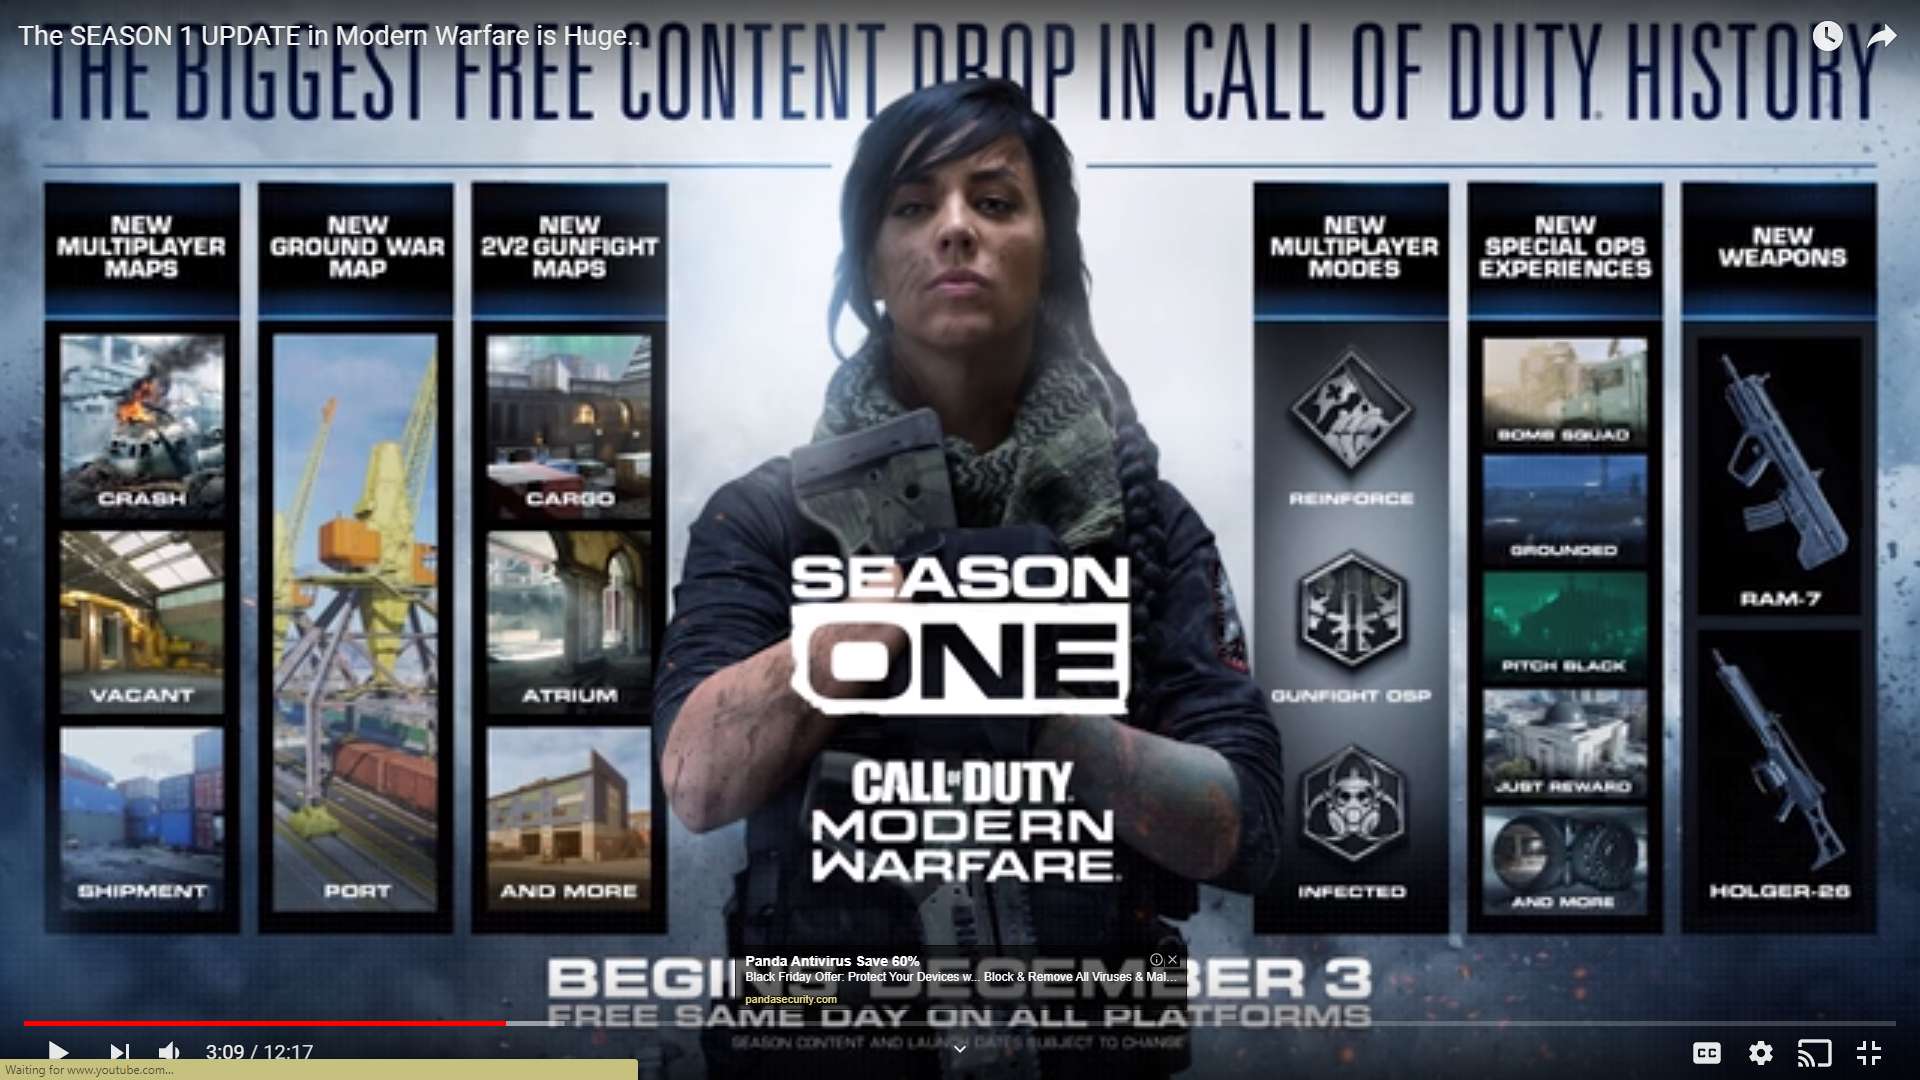 Season One Content Drops Next Week In Call Of Duty: Modern Warfare; Will Be Completely Free